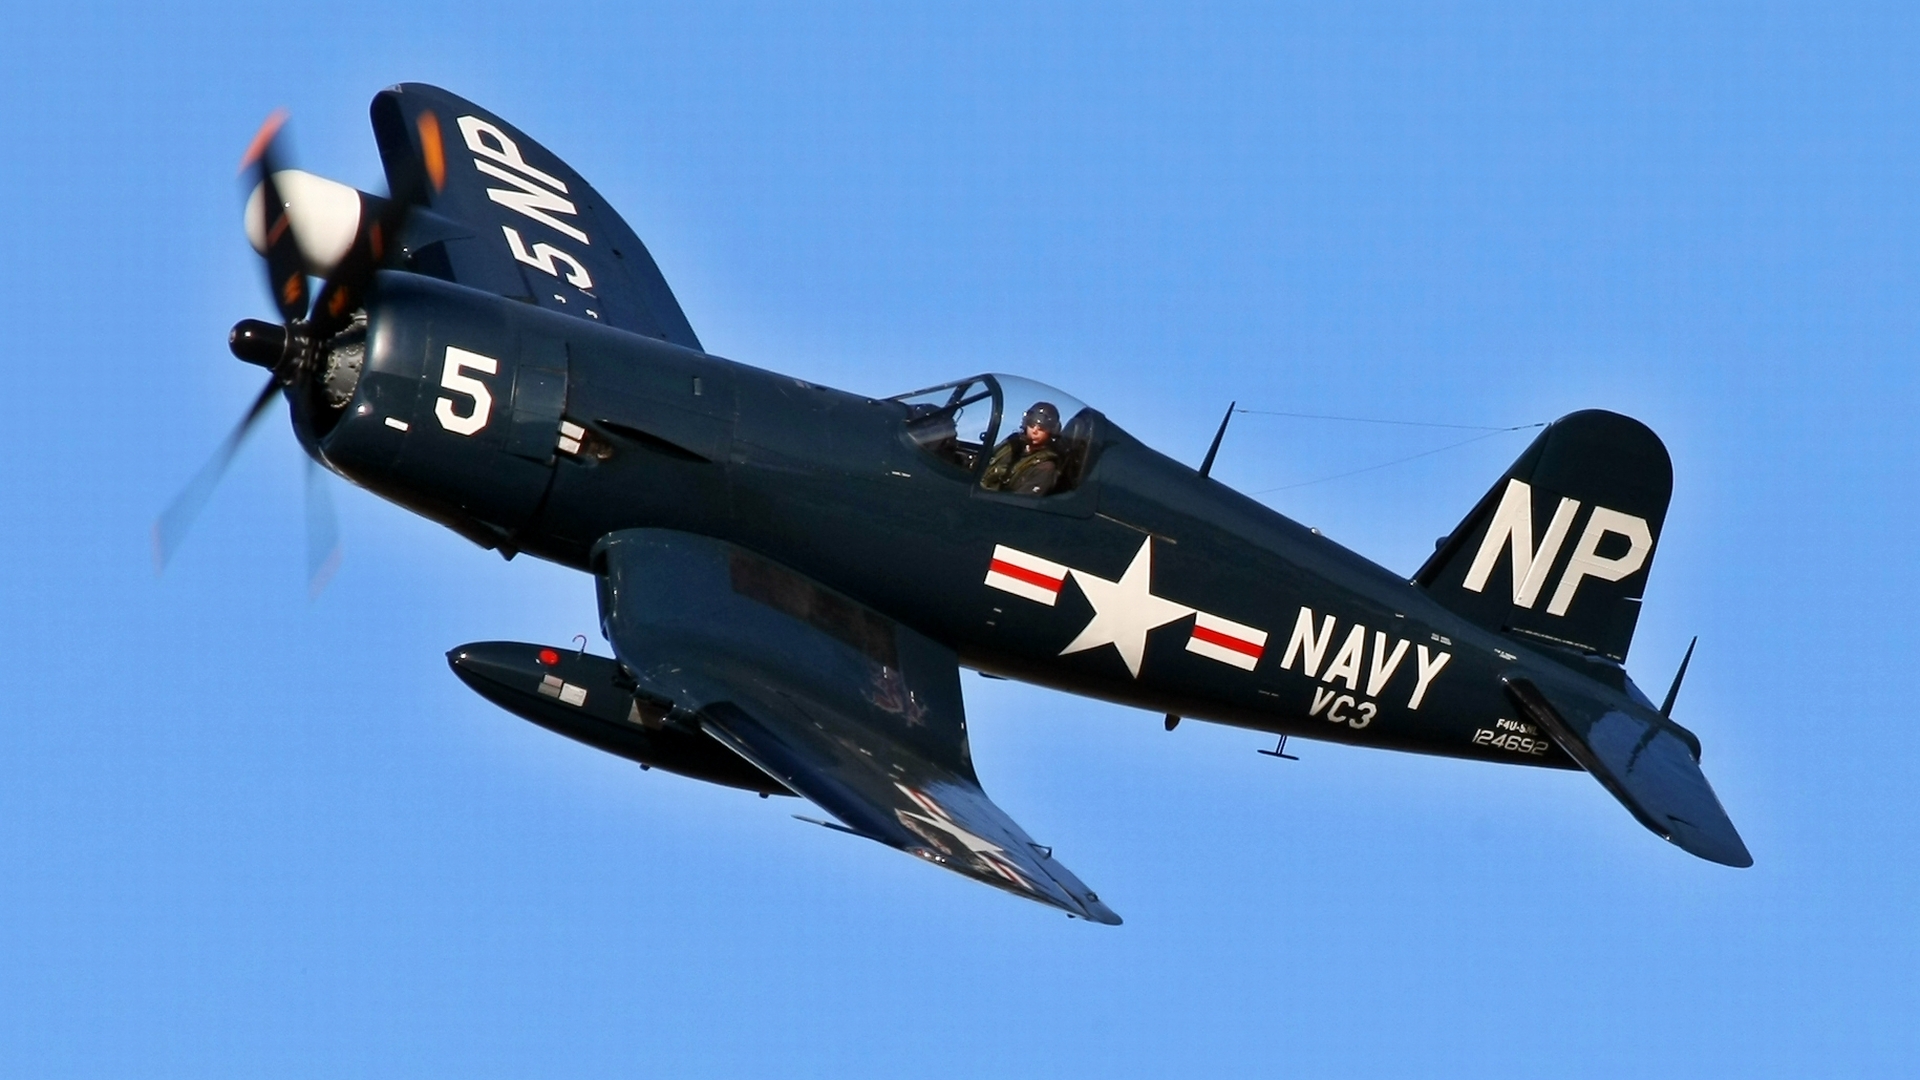 A vintage military aircraft with the iconic F4F Corsair design in a stunning desktop wallpaper.